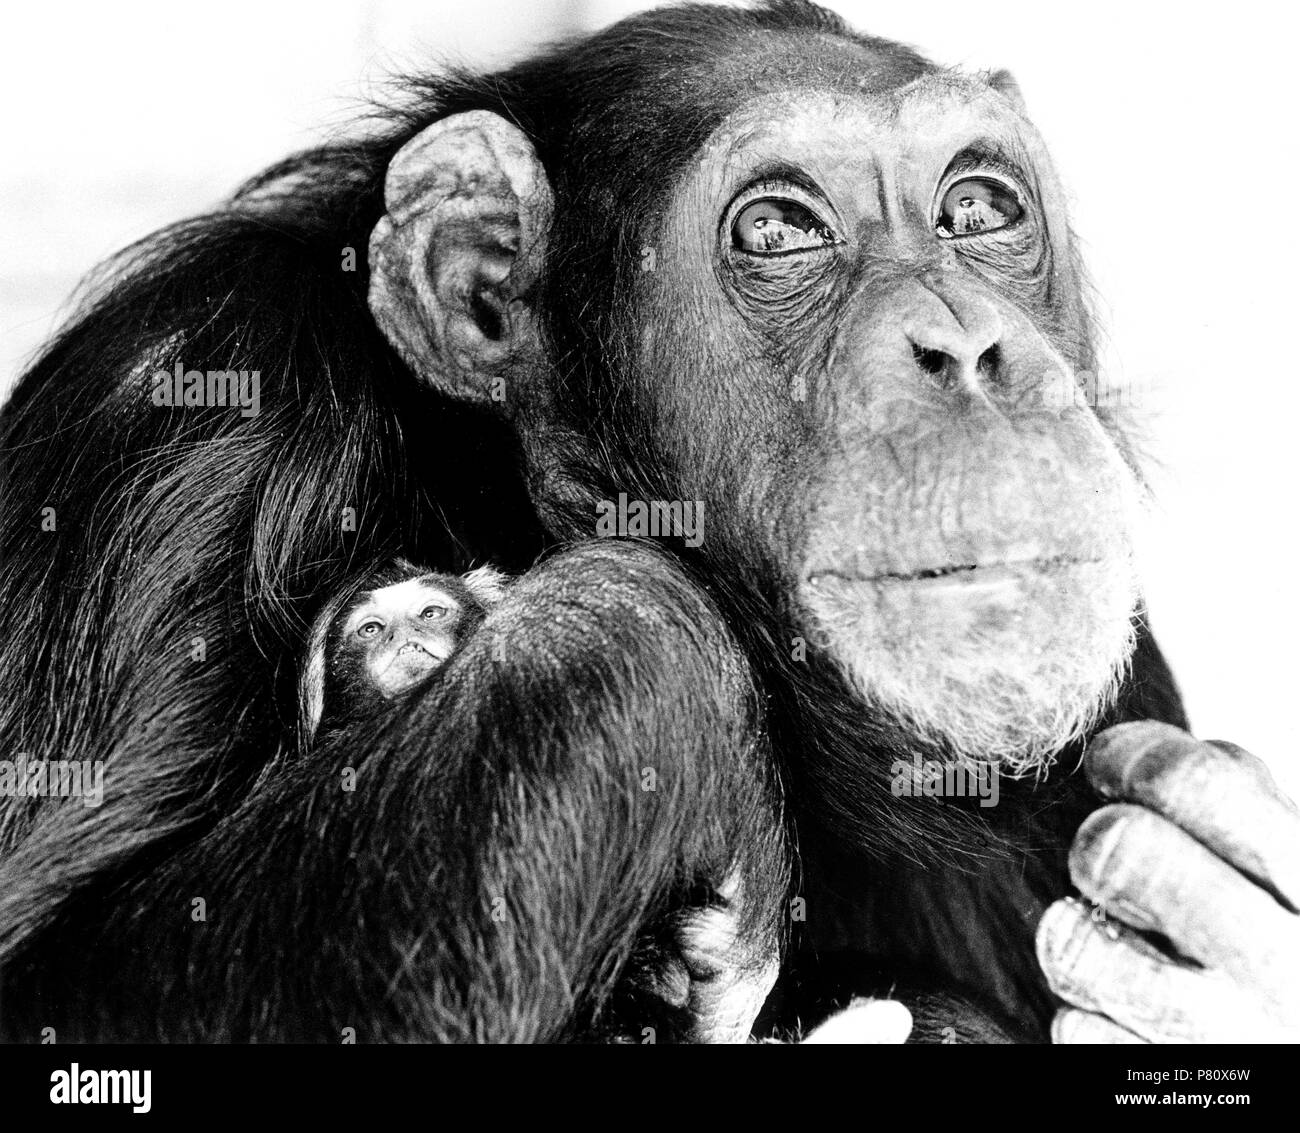 Chimpanzee holding little monkeys in his arms, England, Great Britain Stock Photo